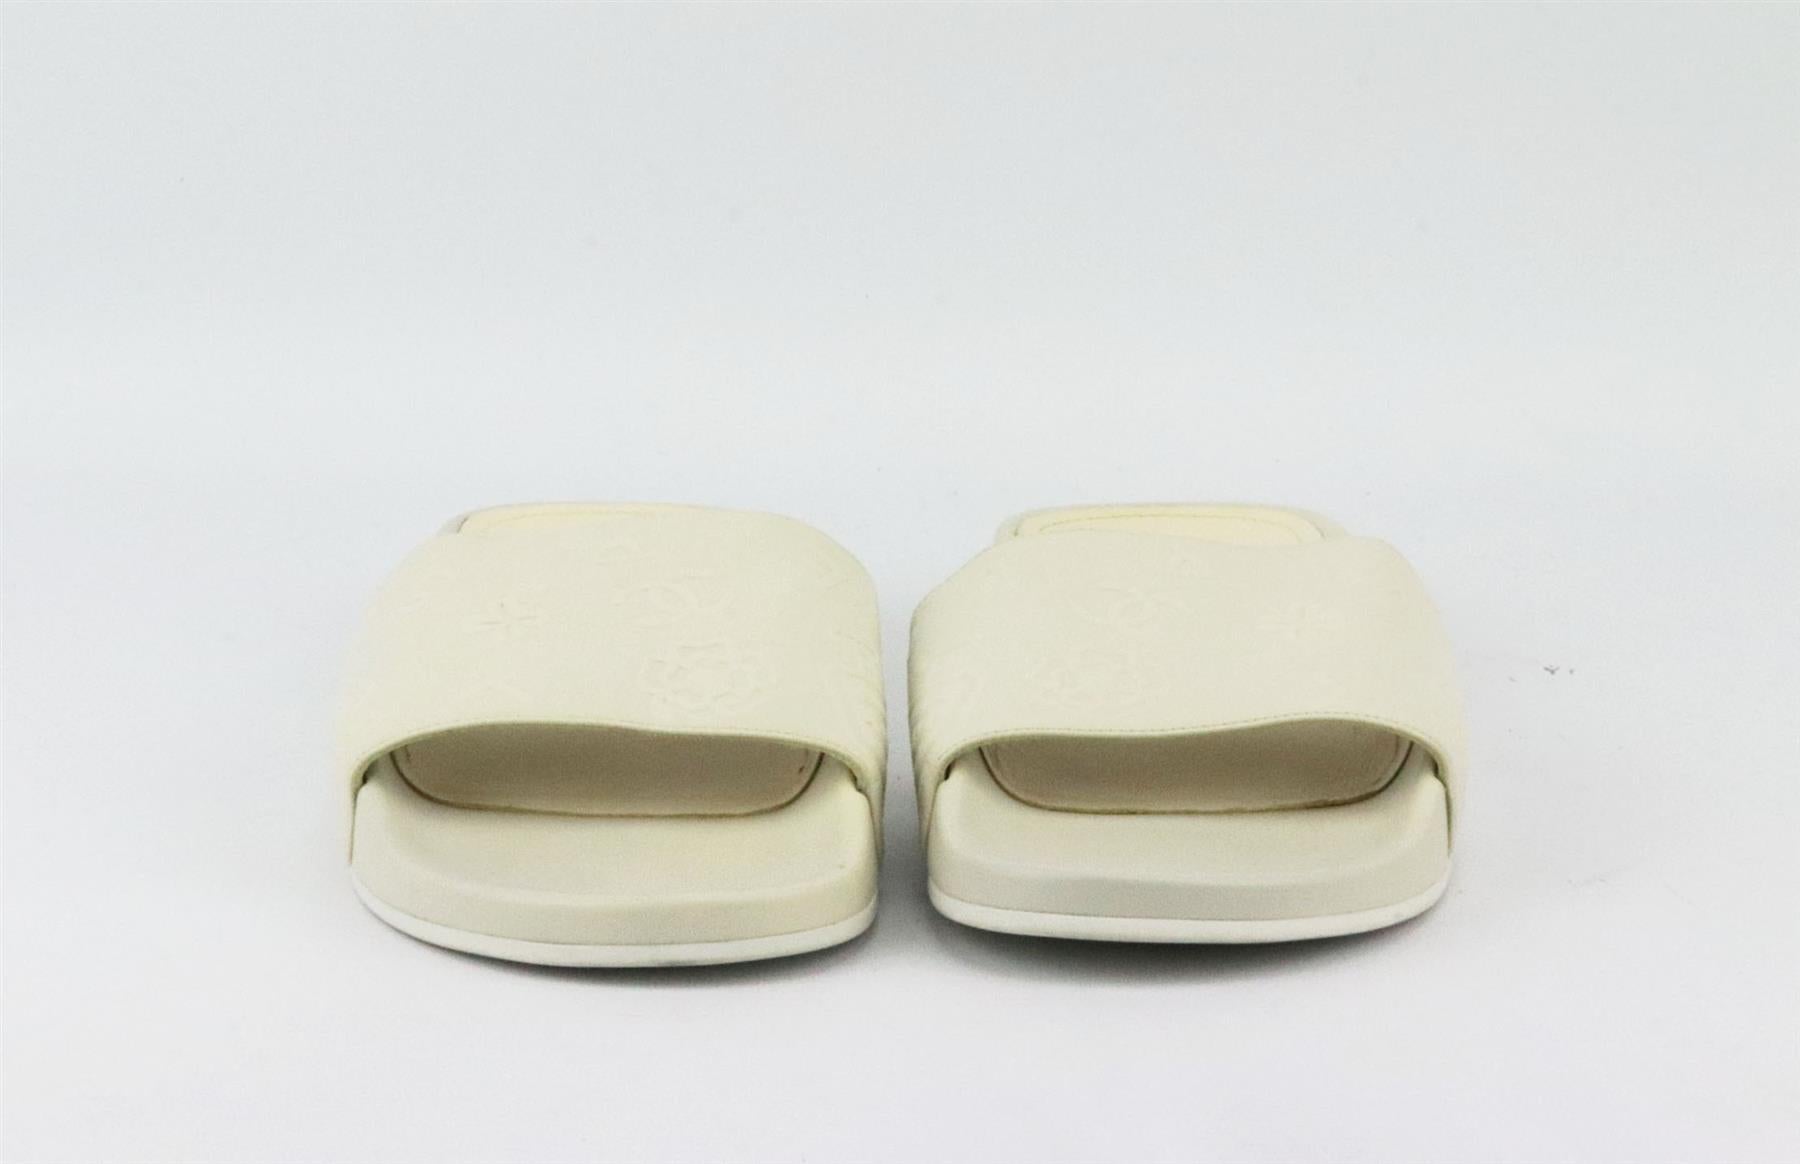 Chanel may specialize in luxurious bags, but the brand also designs great pieces, these slides are made from white CC detailed embossed leather and has a contoured leather footbed with gripped soles for comfort and grip. Sole measures approximately